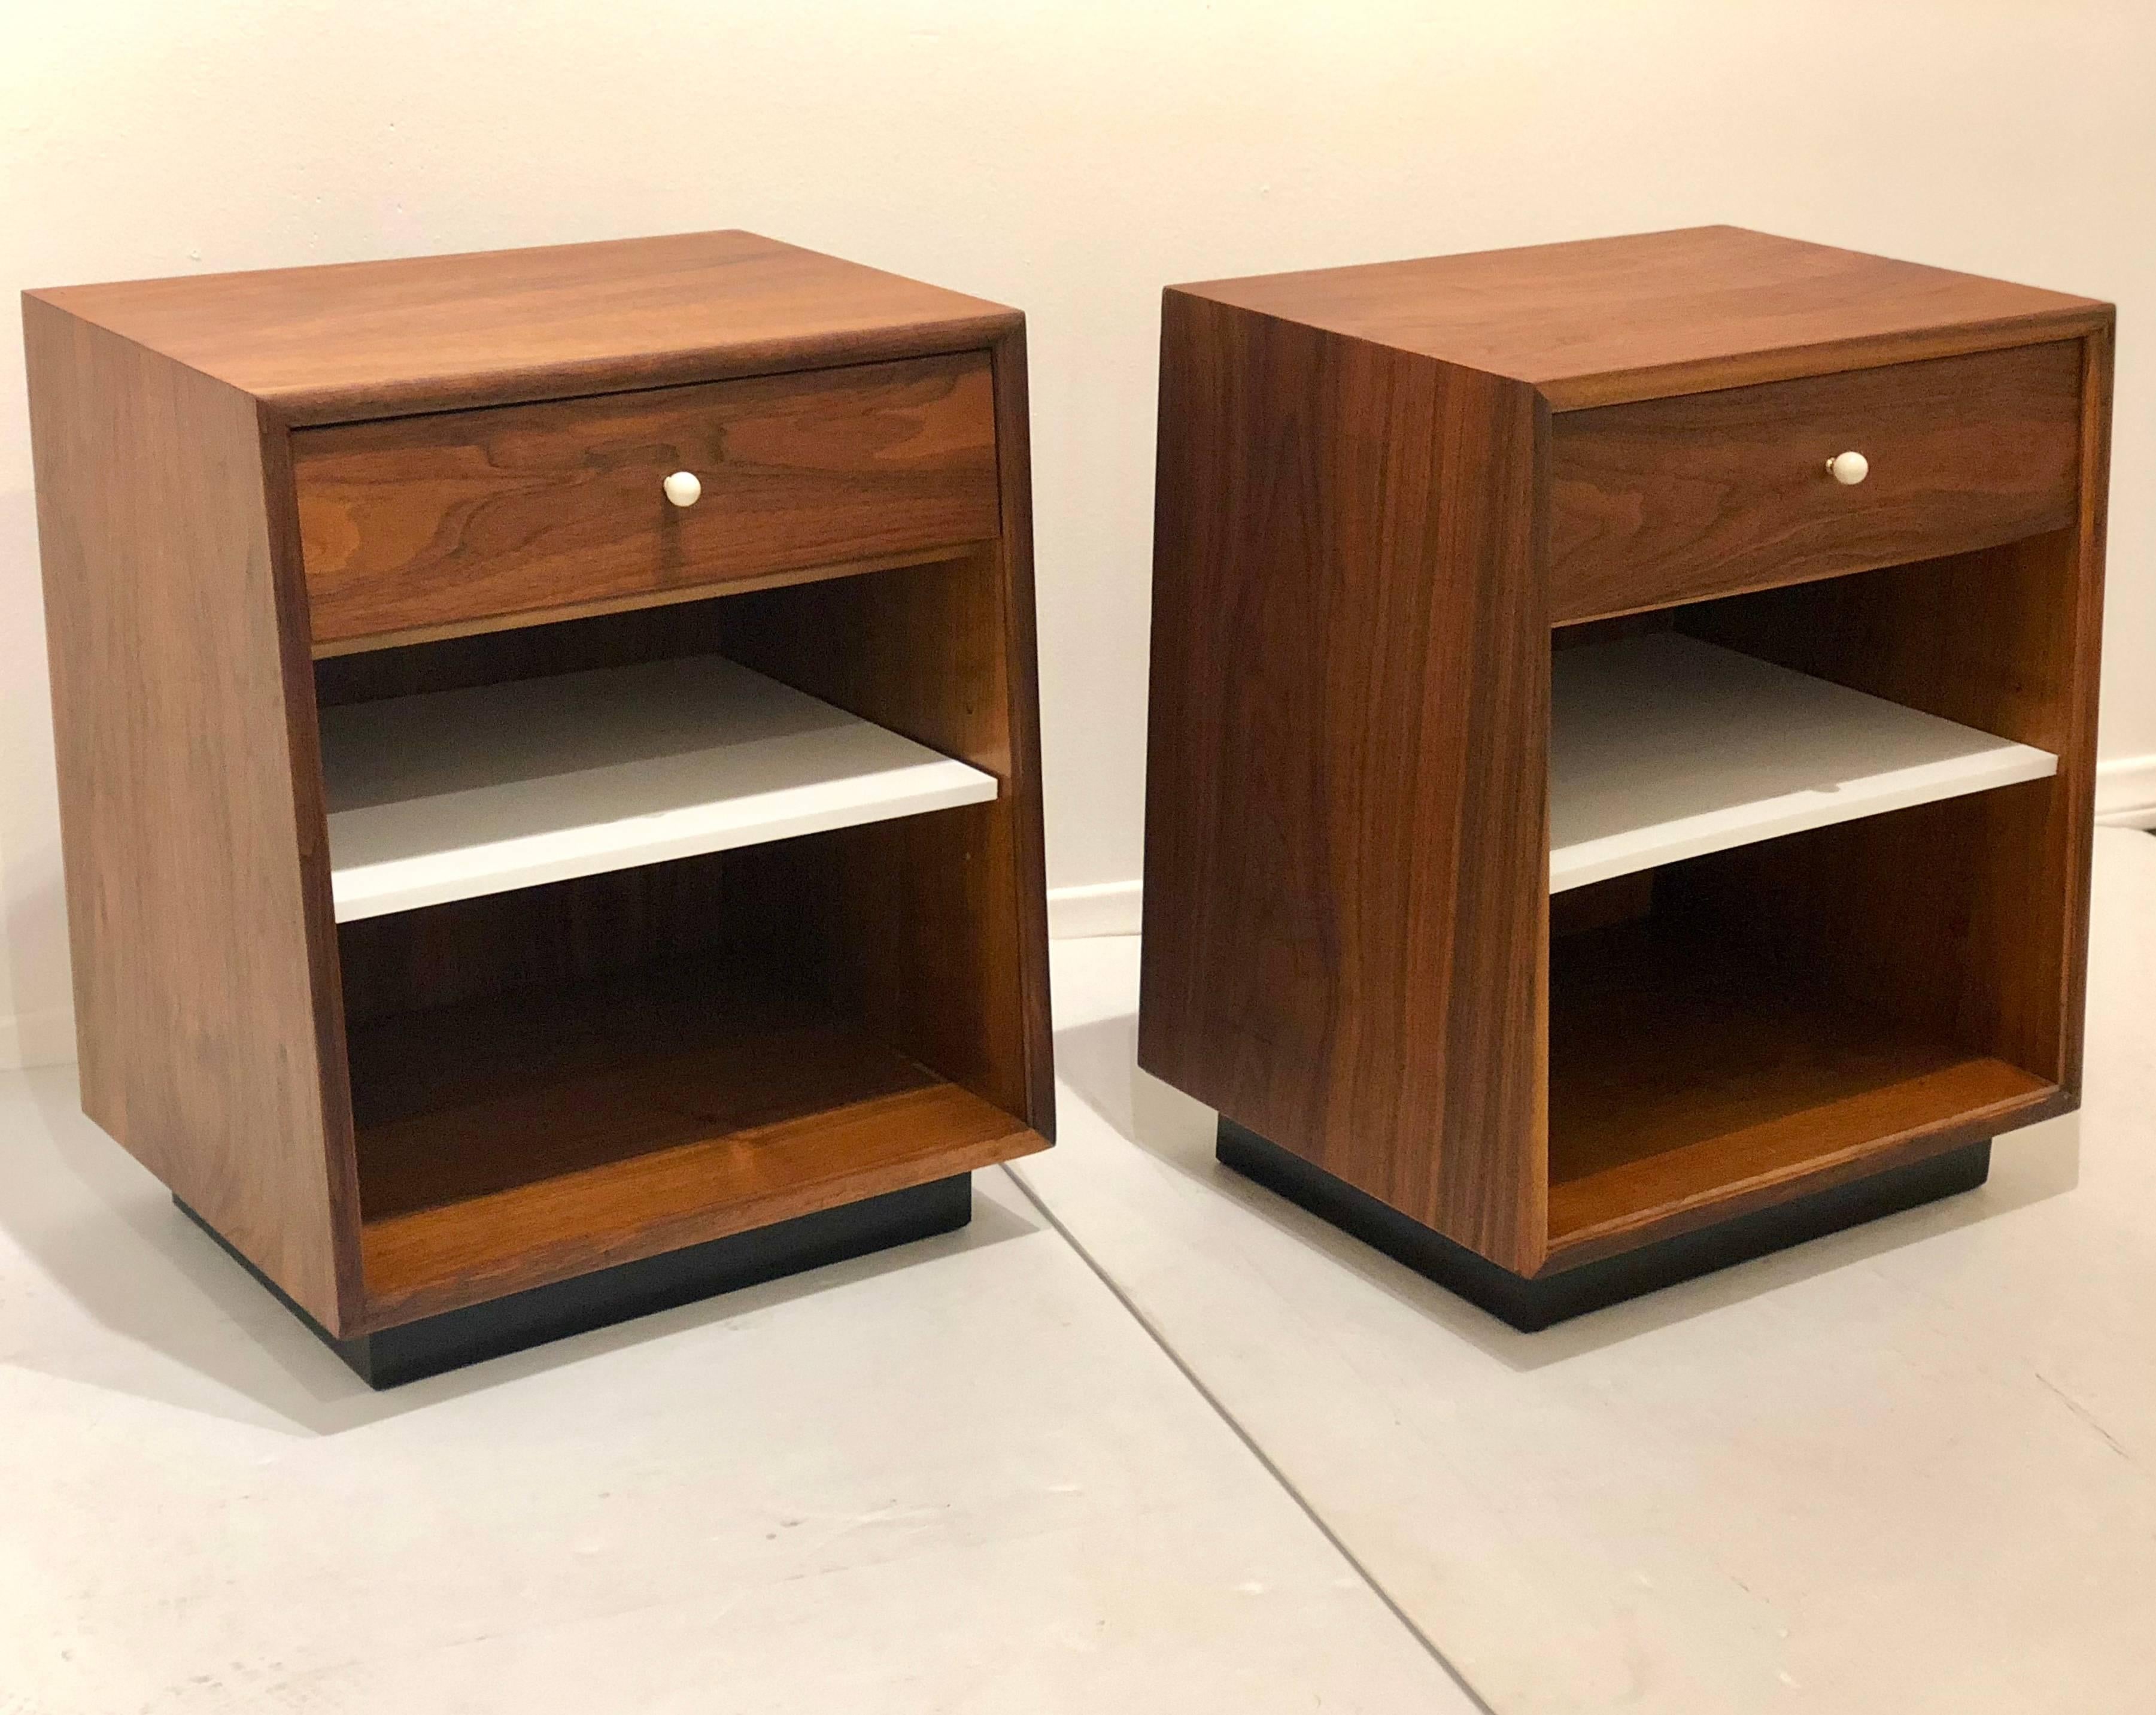 Nice pair of freshly refinished walnut nightstand by Kipp Stewart for Drexel, the bases have been sprayed in black and the middle removable shelf its in white solid plastic, to match the handle, the set its beautiful and in great condition.